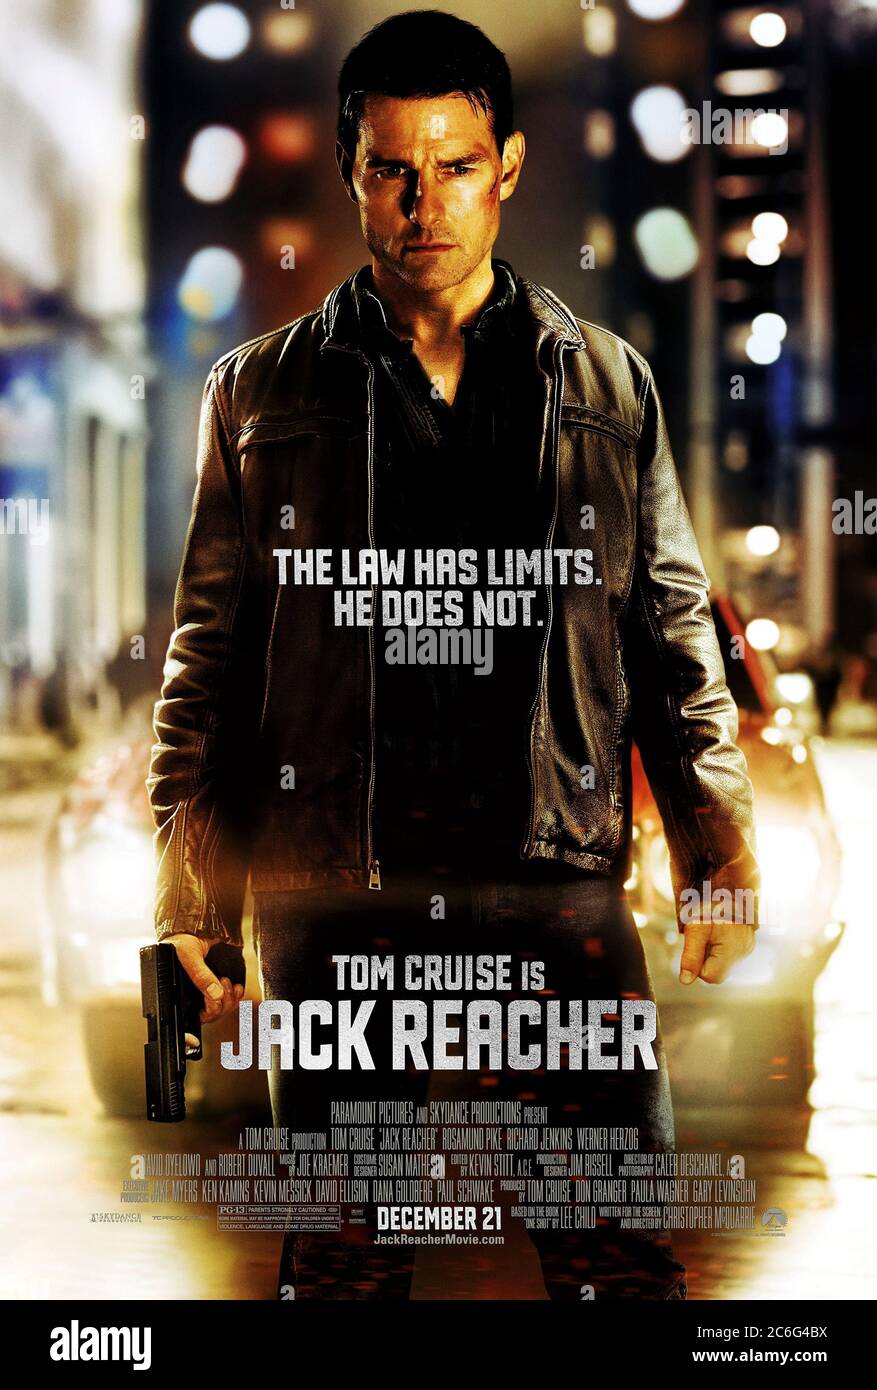 Jack Reacher (2012) directed by Christopher McQuarrie and starring Tom Cruise, Rosamund Pike, Richard Jenkins and David Oyelowo. Lee Child's popular ex-MP detective character hits the big screen as Reacher investigates a sniper charged with multiple homicide. Stock Photo